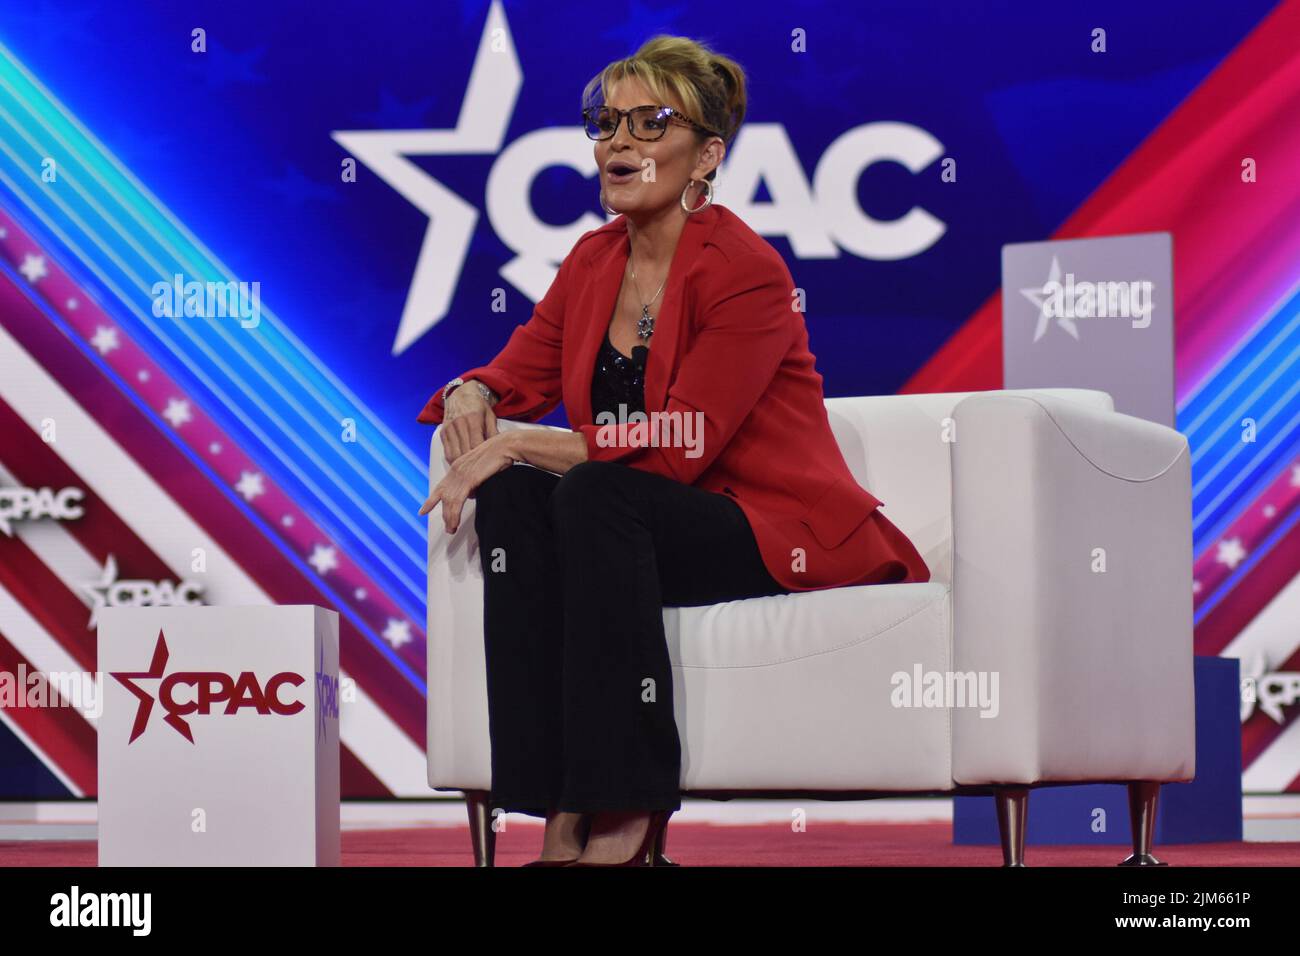 Dallas, Texas, USA. 4th Aug, 2022. (NEW) Sarah Palin delivers remarks at the Conservative Political Action Conference 2022 in Dallas, Texas. August 4, 2022, Dallas, TX, USA. Sarah Palin delivers remarks during the Conservative Political Action Conference (CPAC), held in the state of Texas, in United States, on Thursday (4). Sarah Palin is running for Congress to replace Representative Don Young, who died. Sarah Palin is a Former Governor of the State of Alaska. The conference is broadcast live on the CPAC website and online on Fox Nation. (Credit Image: © Kyle Mazza/TheNEWS2 via ZUMA Press Wi Stock Photo